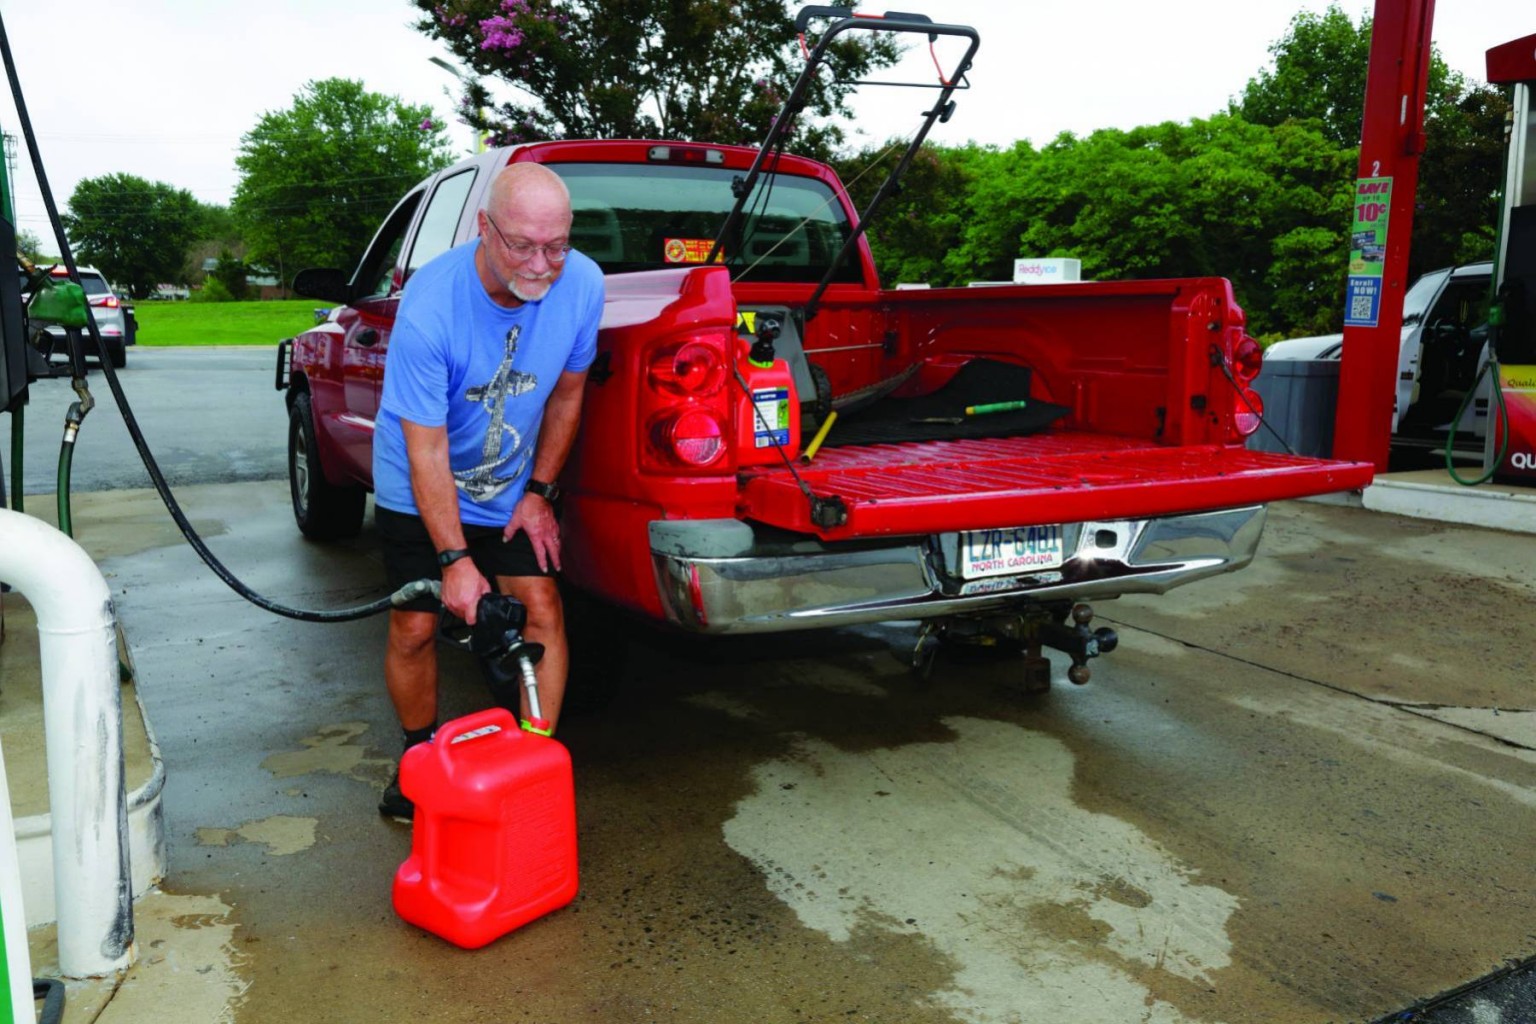 Fuel Safety Month Tips to Keep People, Pets and Property Safe